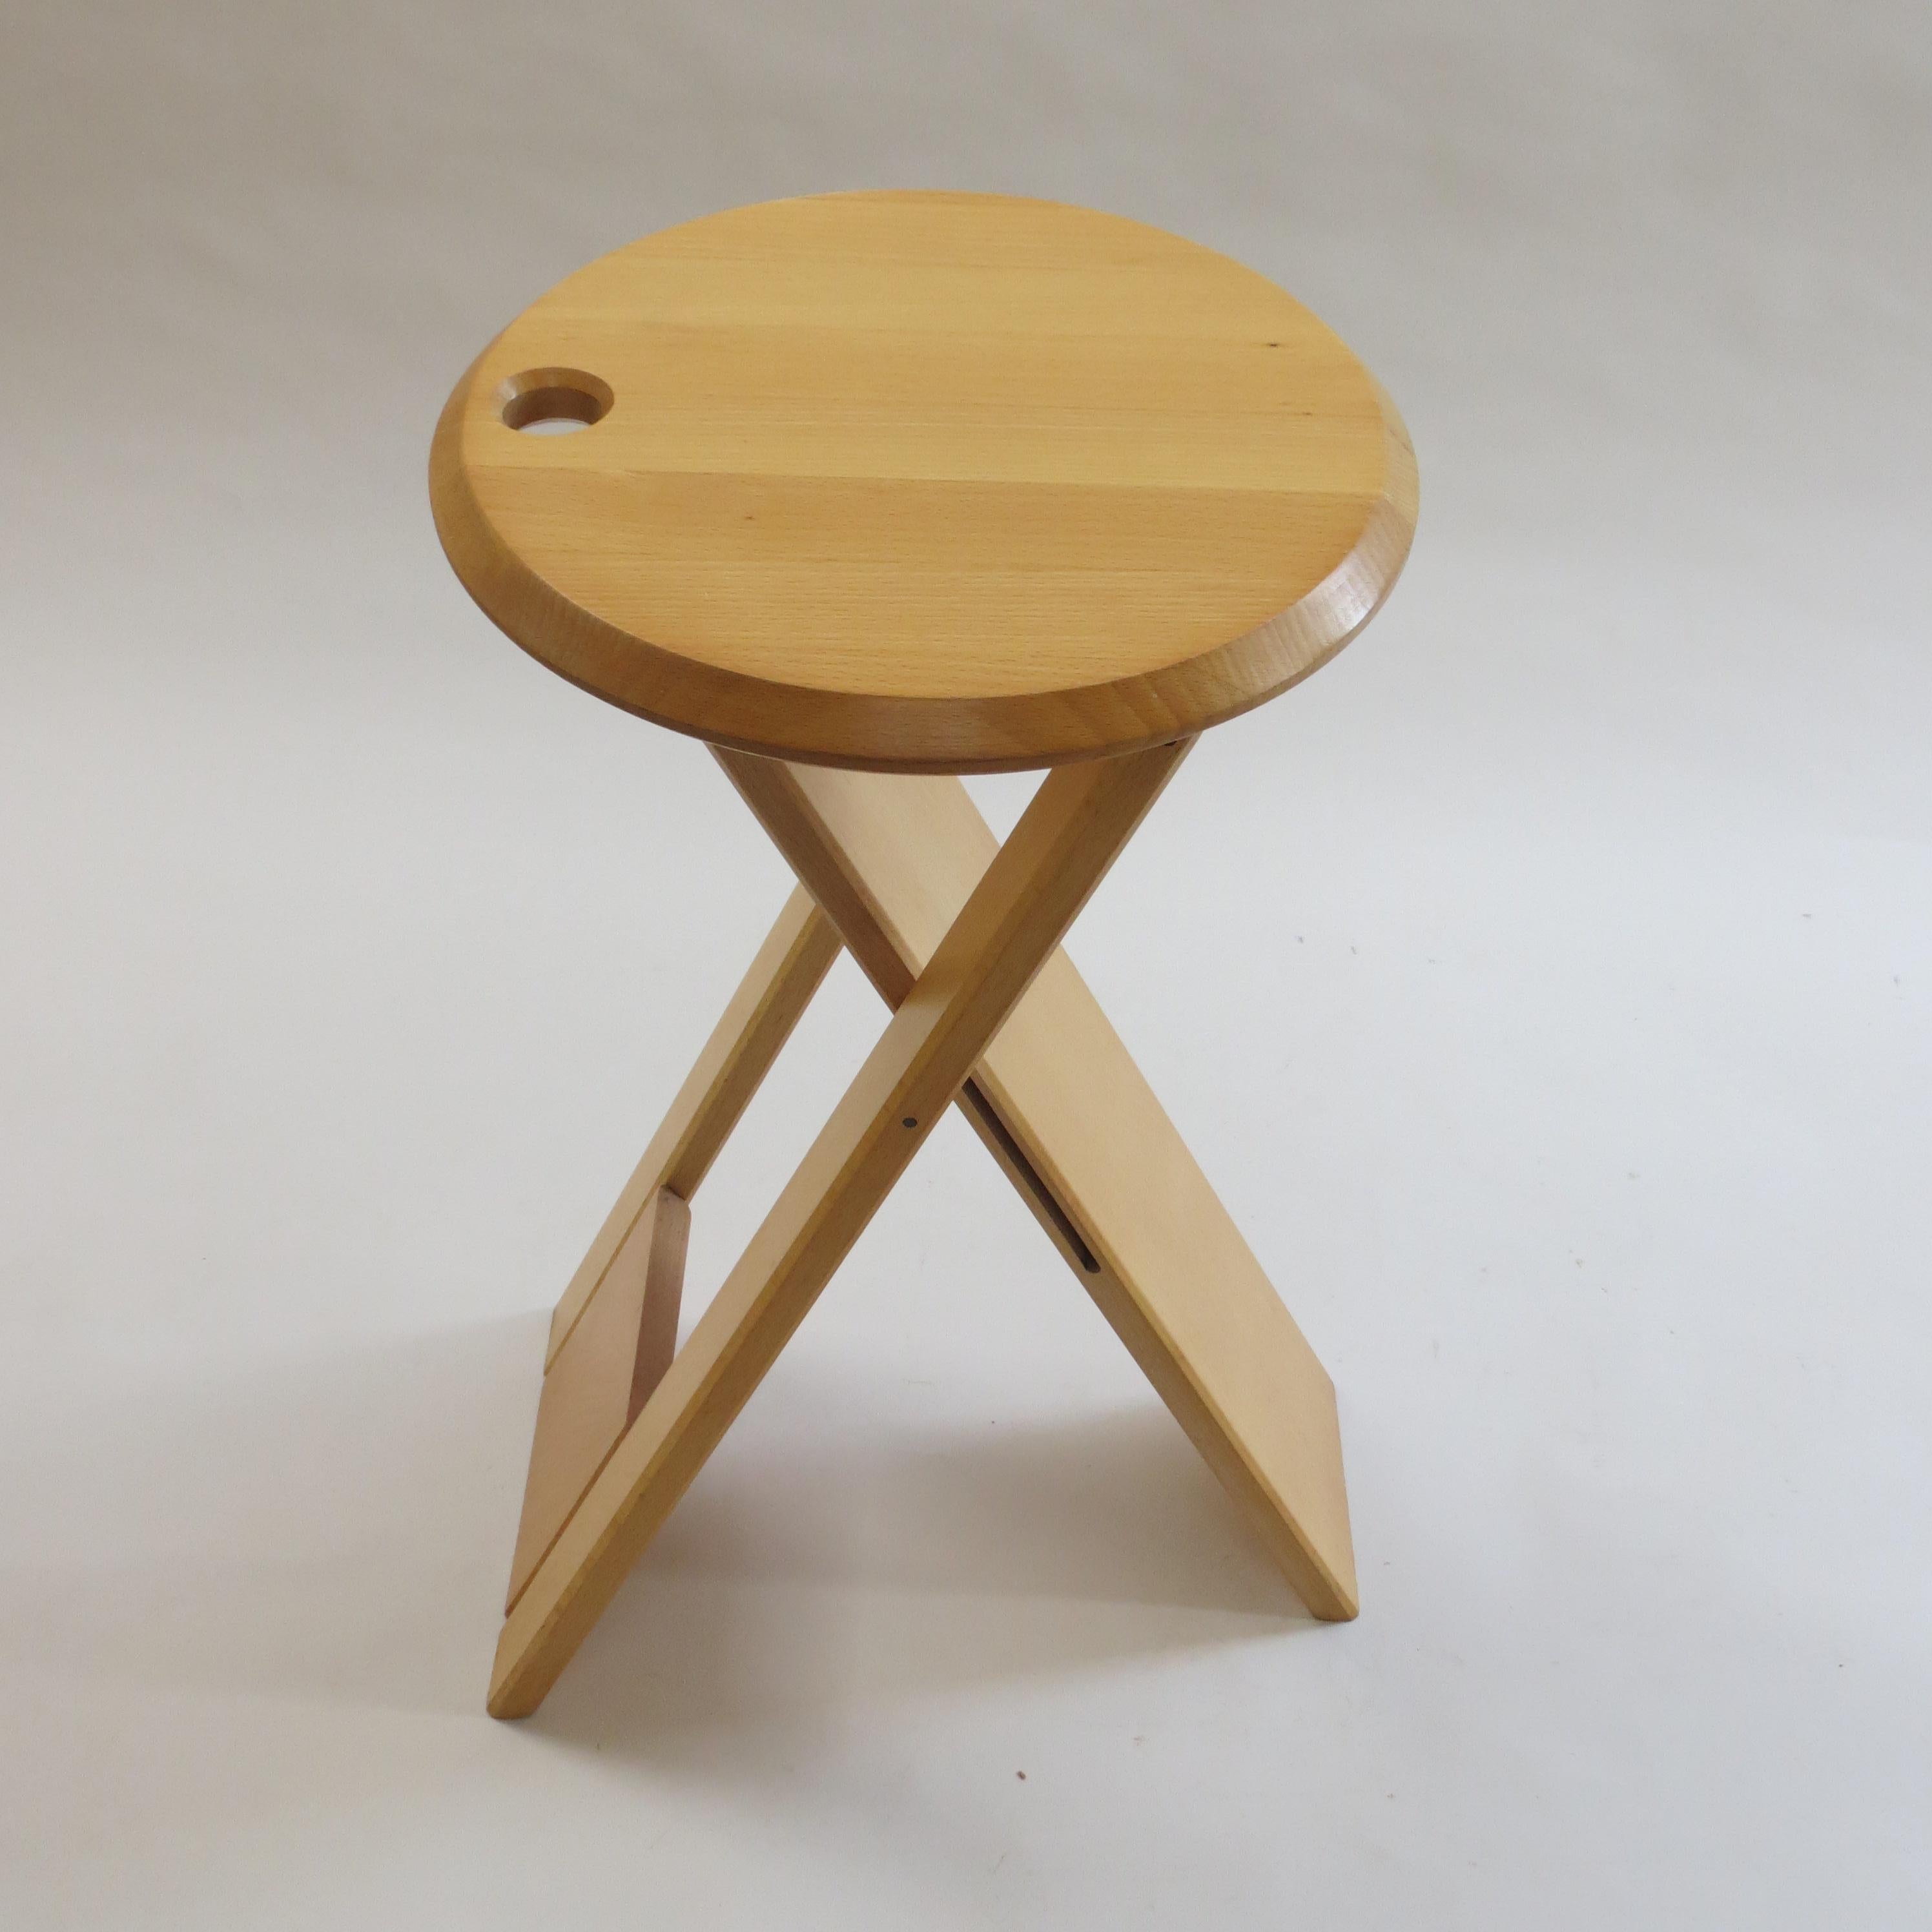 Late 20th Century 1980s Beech Folding Suzy Stool by Adrian Reed for Princes Design Works